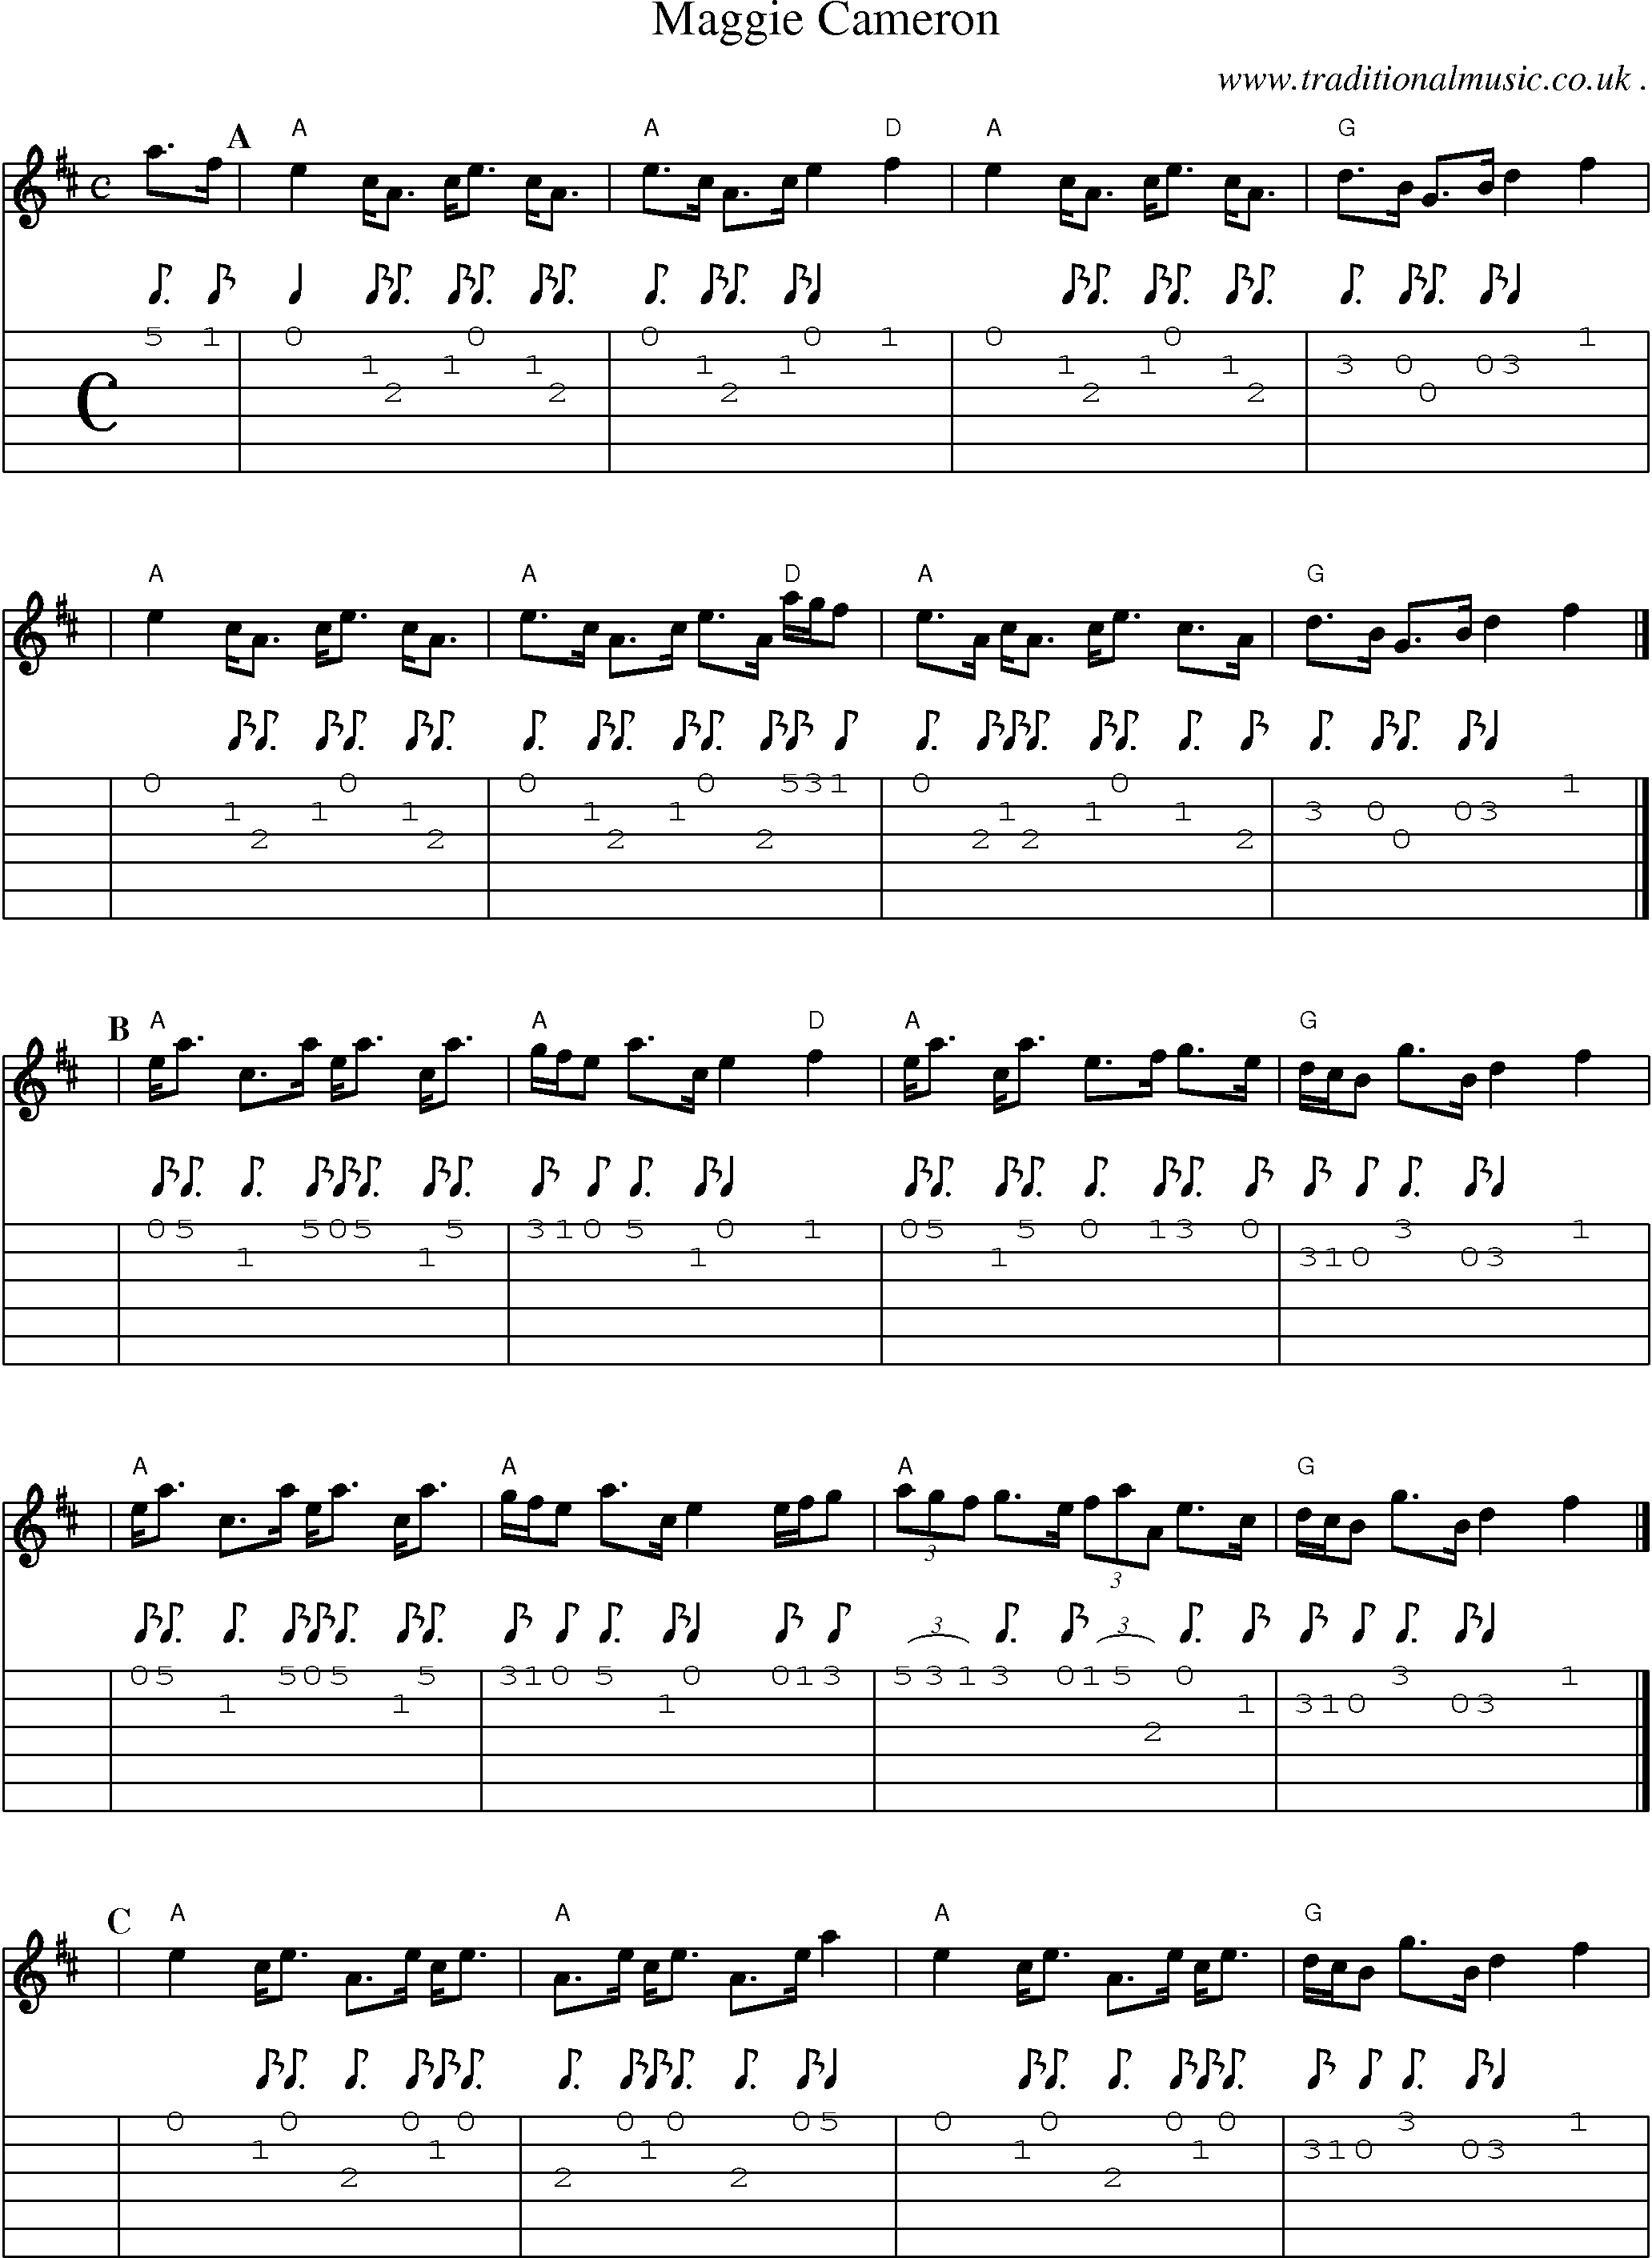 Sheet-music  score, Chords and Guitar Tabs for Maggie Cameron